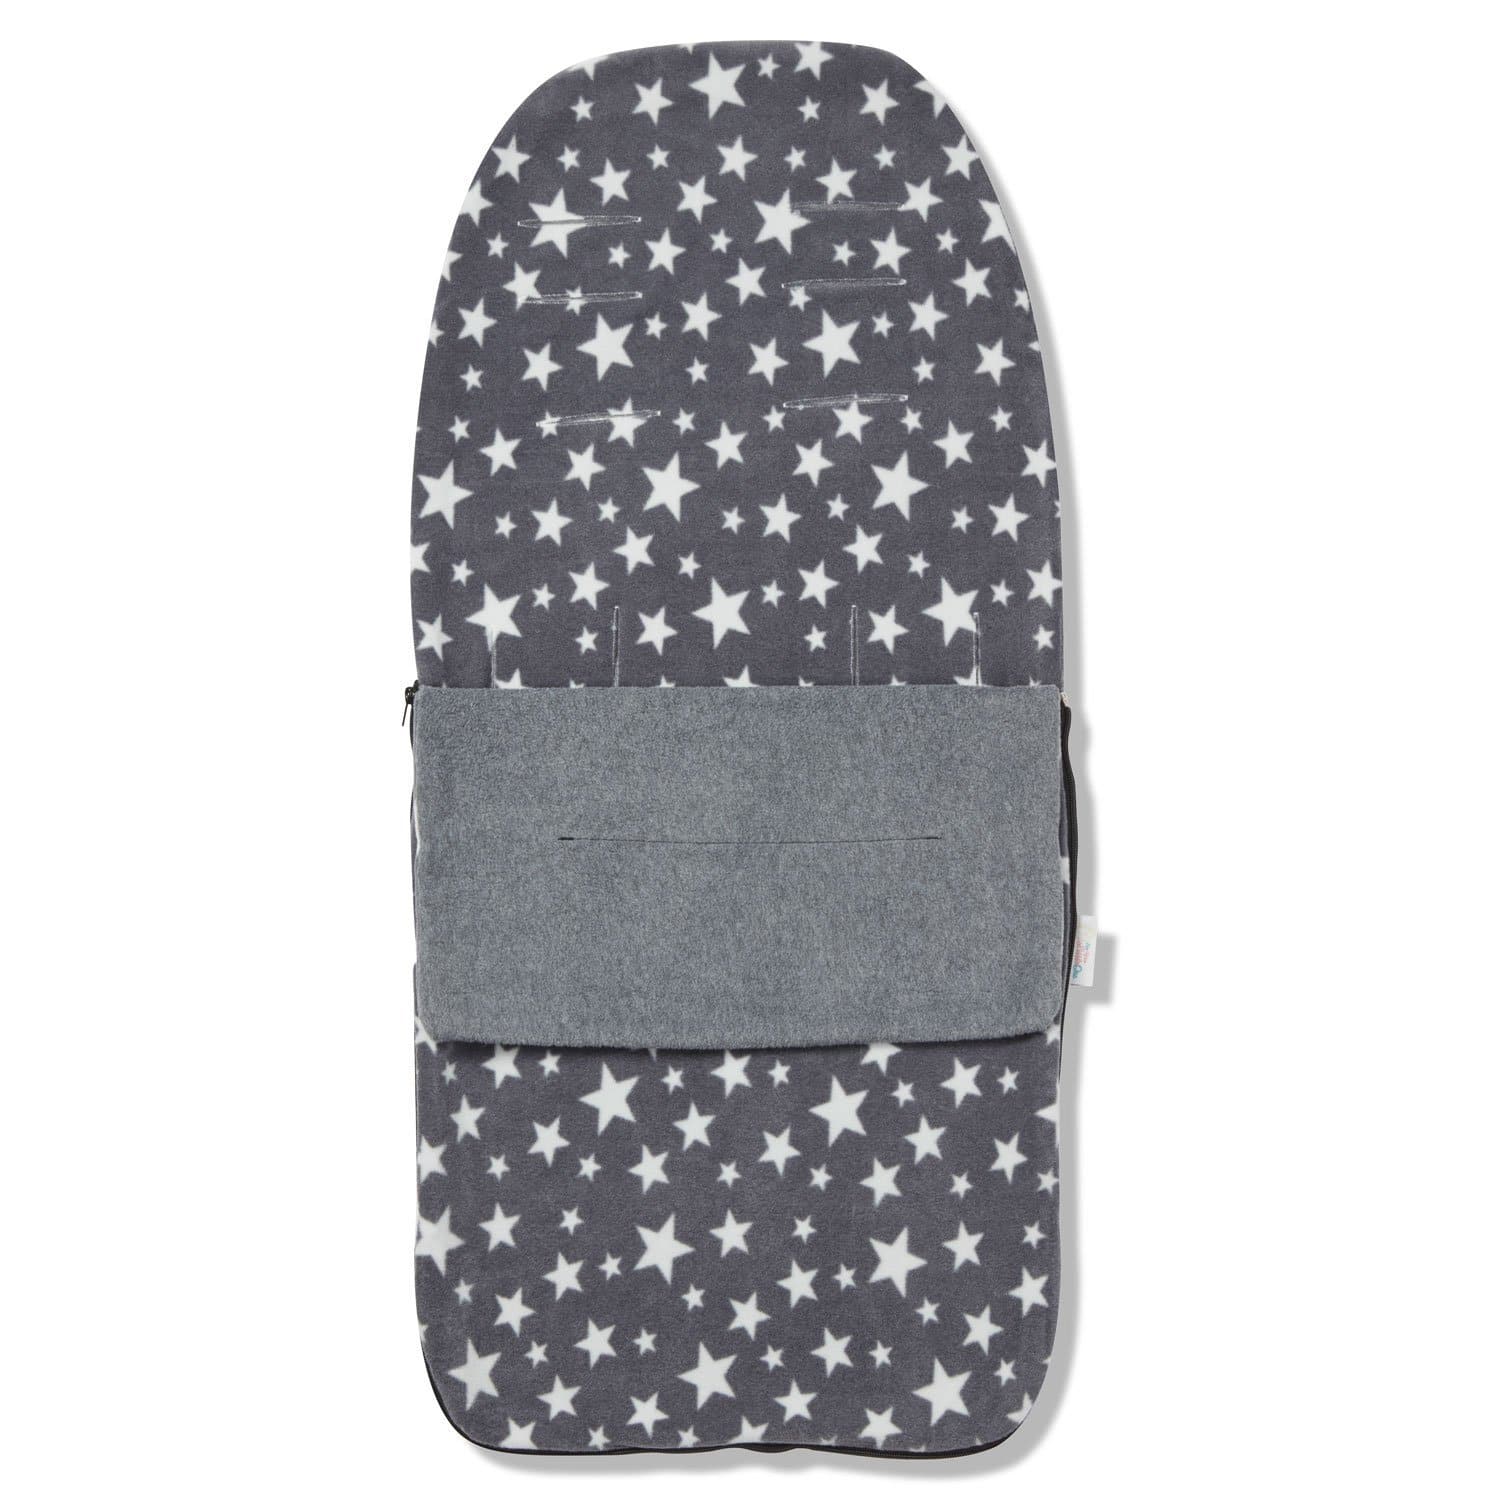 Snuggle Summer Footmuff Compatible with Concord - Grey Star / Fits All Models | For Your Little One